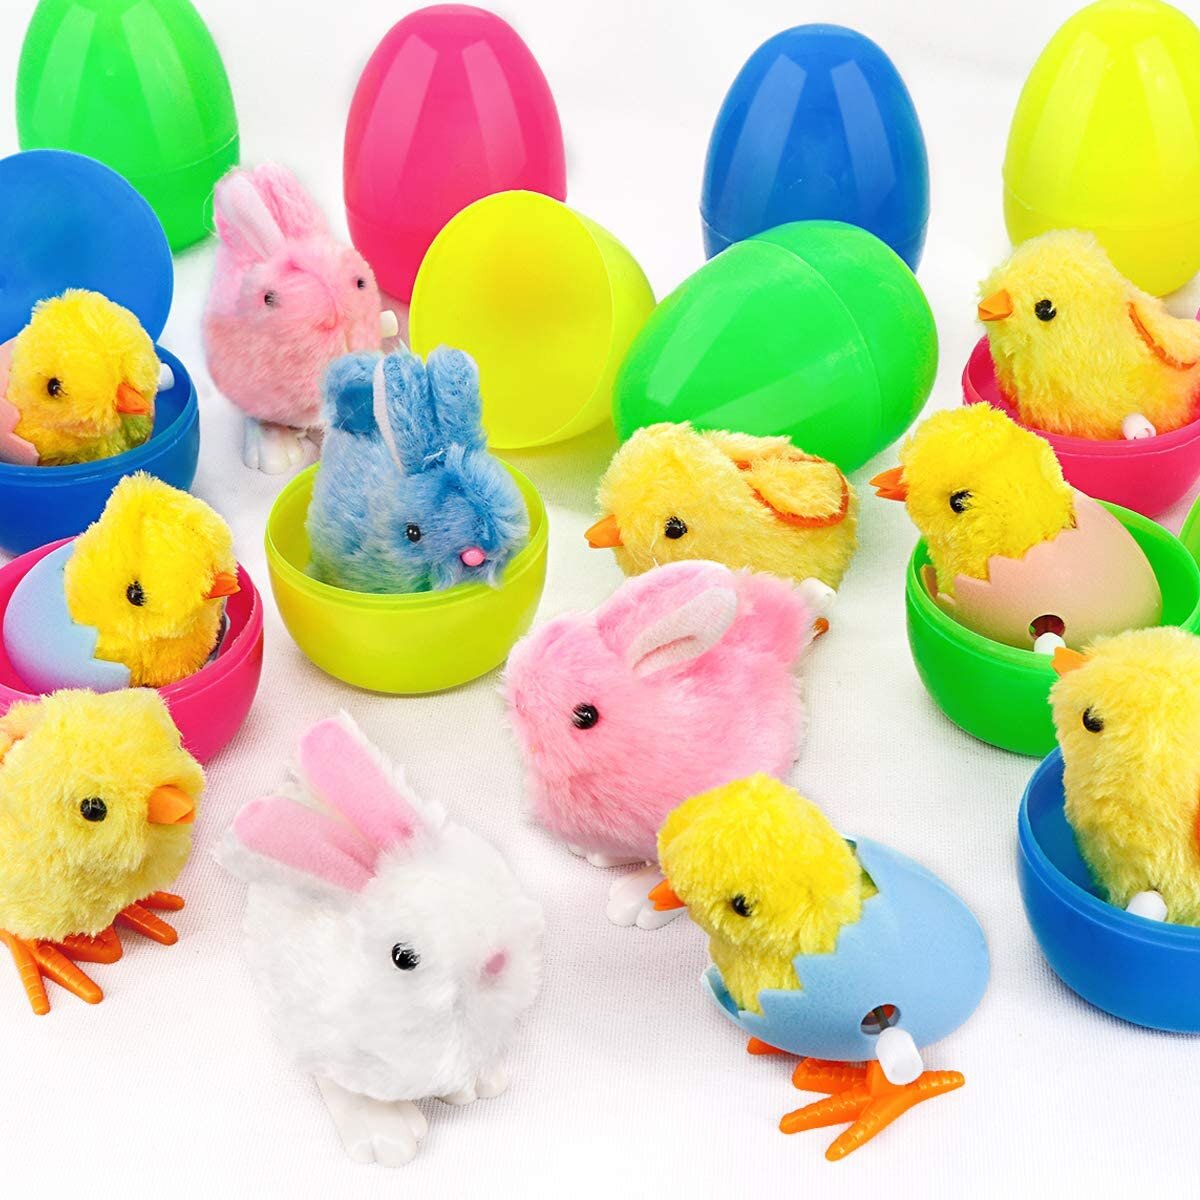 Wholesale plastic egg basket to Organize and Tidy Up Your Home 